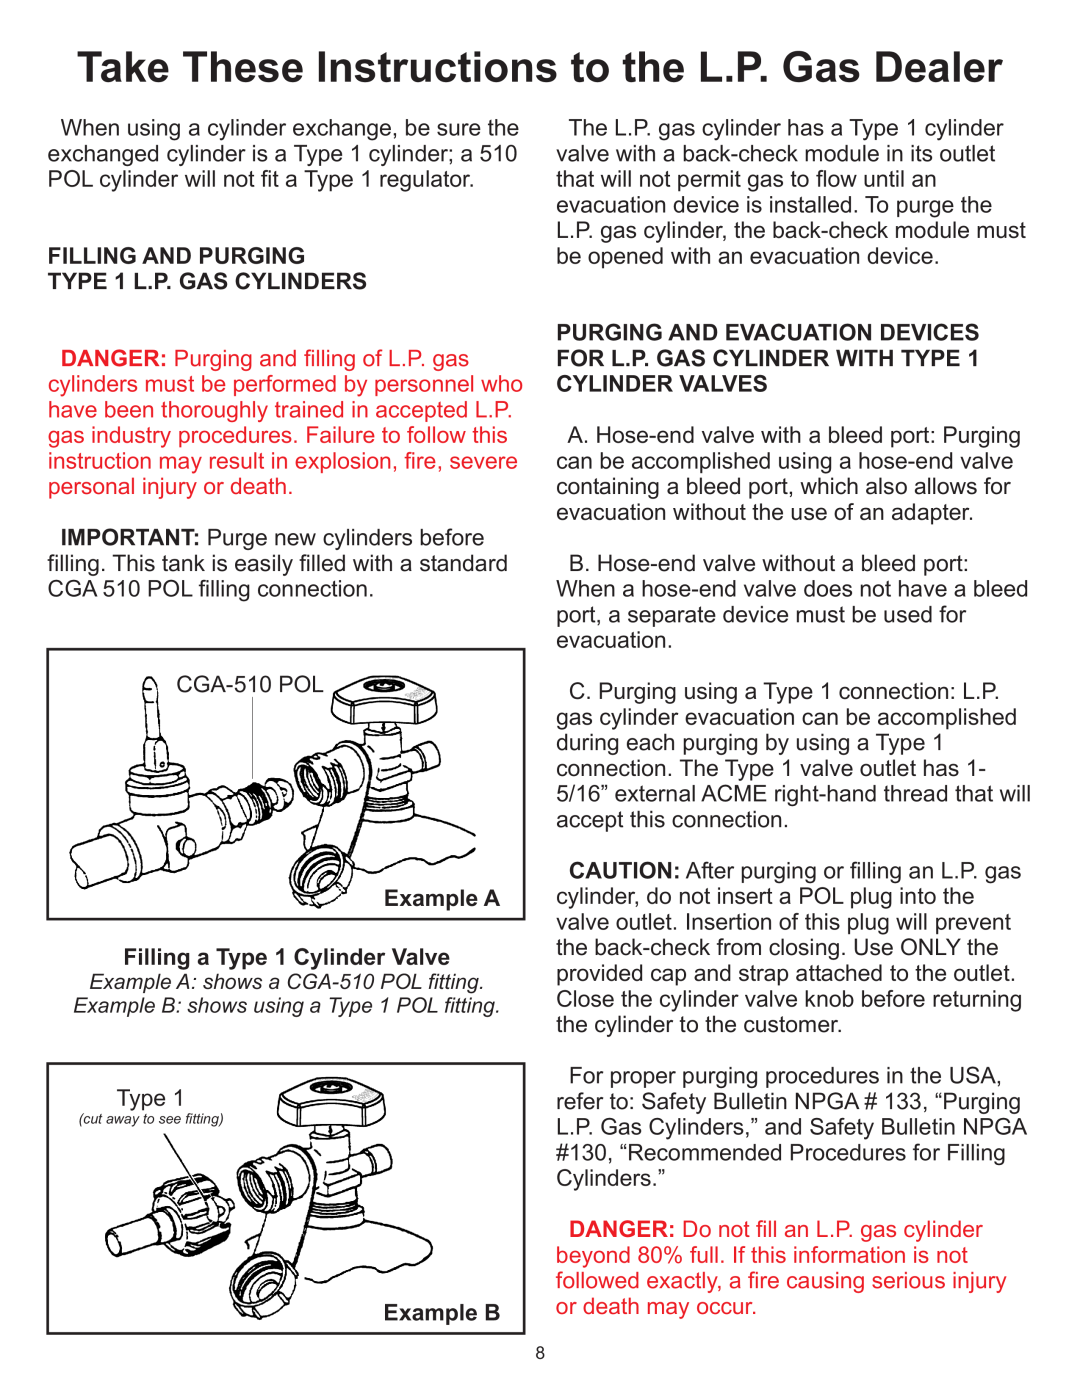 Vermont Casting Gas Grill Take These Instructions to the L.P. Gas Dealer, FILLING AND PURGING TYPE 1 L.P. GAS CYLINDERS 